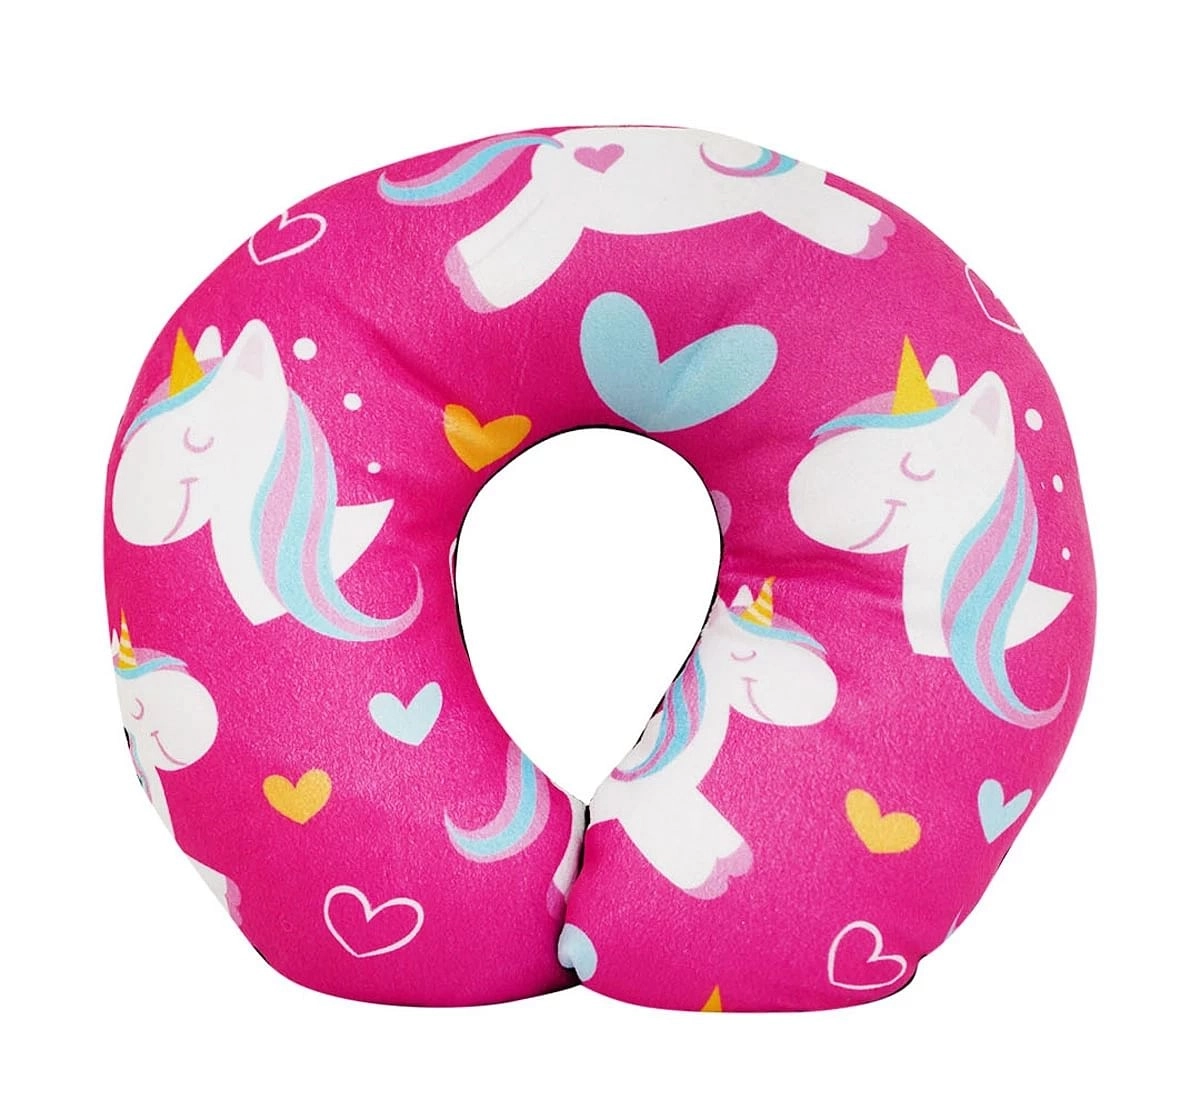 Luvley Ultrasoft Neck Pillow For Kids, Pink, 3Y+